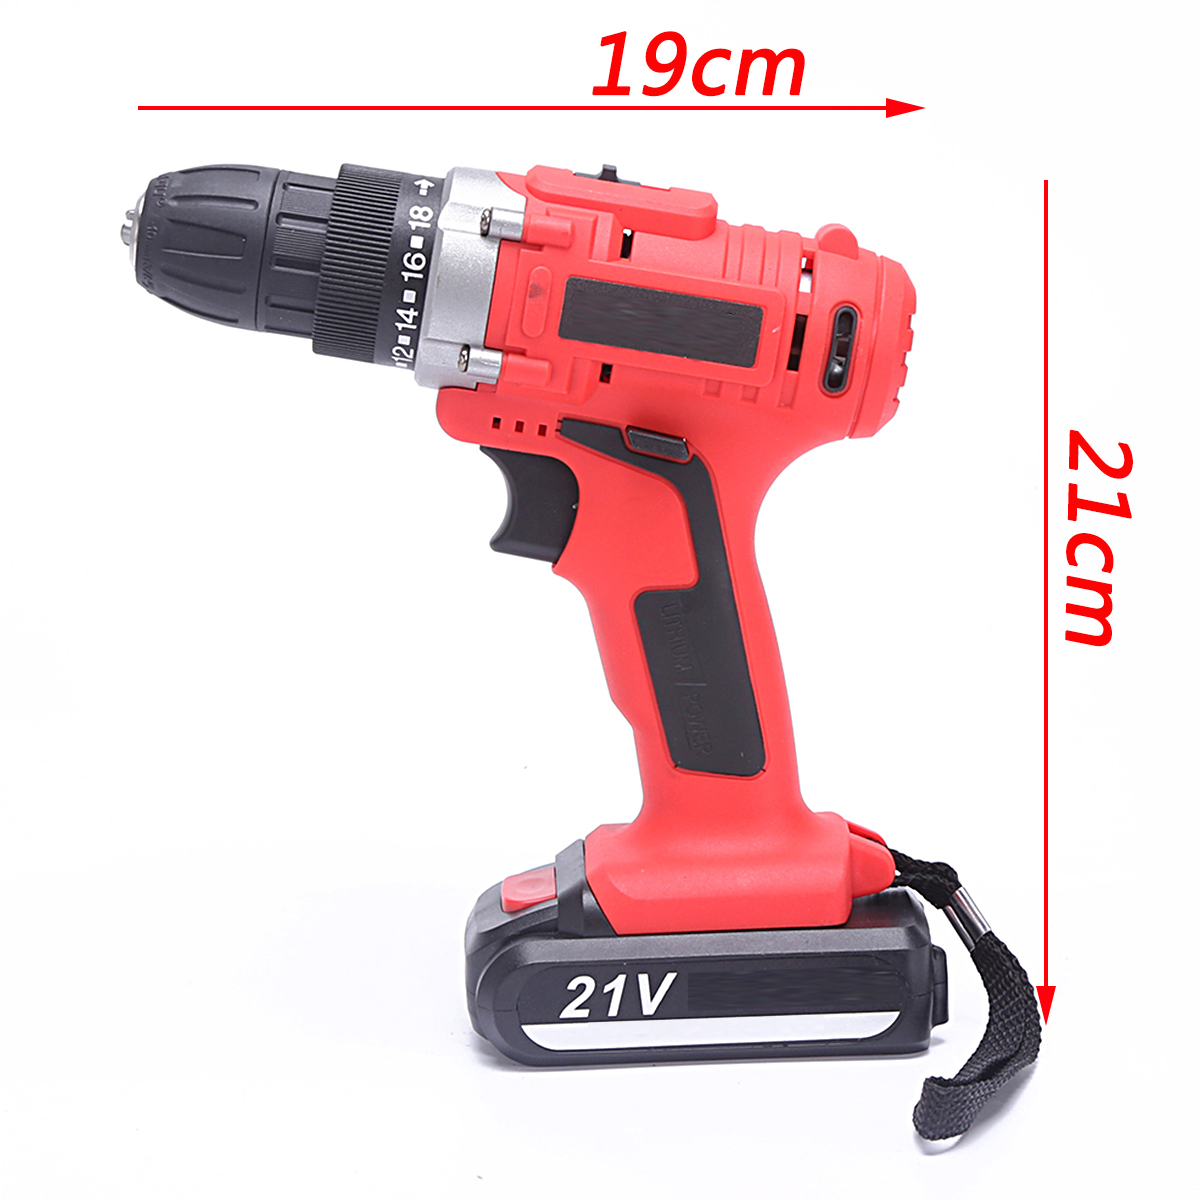 300W-21V-LED-Cordless-Electric-Drill-Screwdriver-1500mAh-Rechargeable-Li-Ion-Battery-Repair-Tools-1421882-10